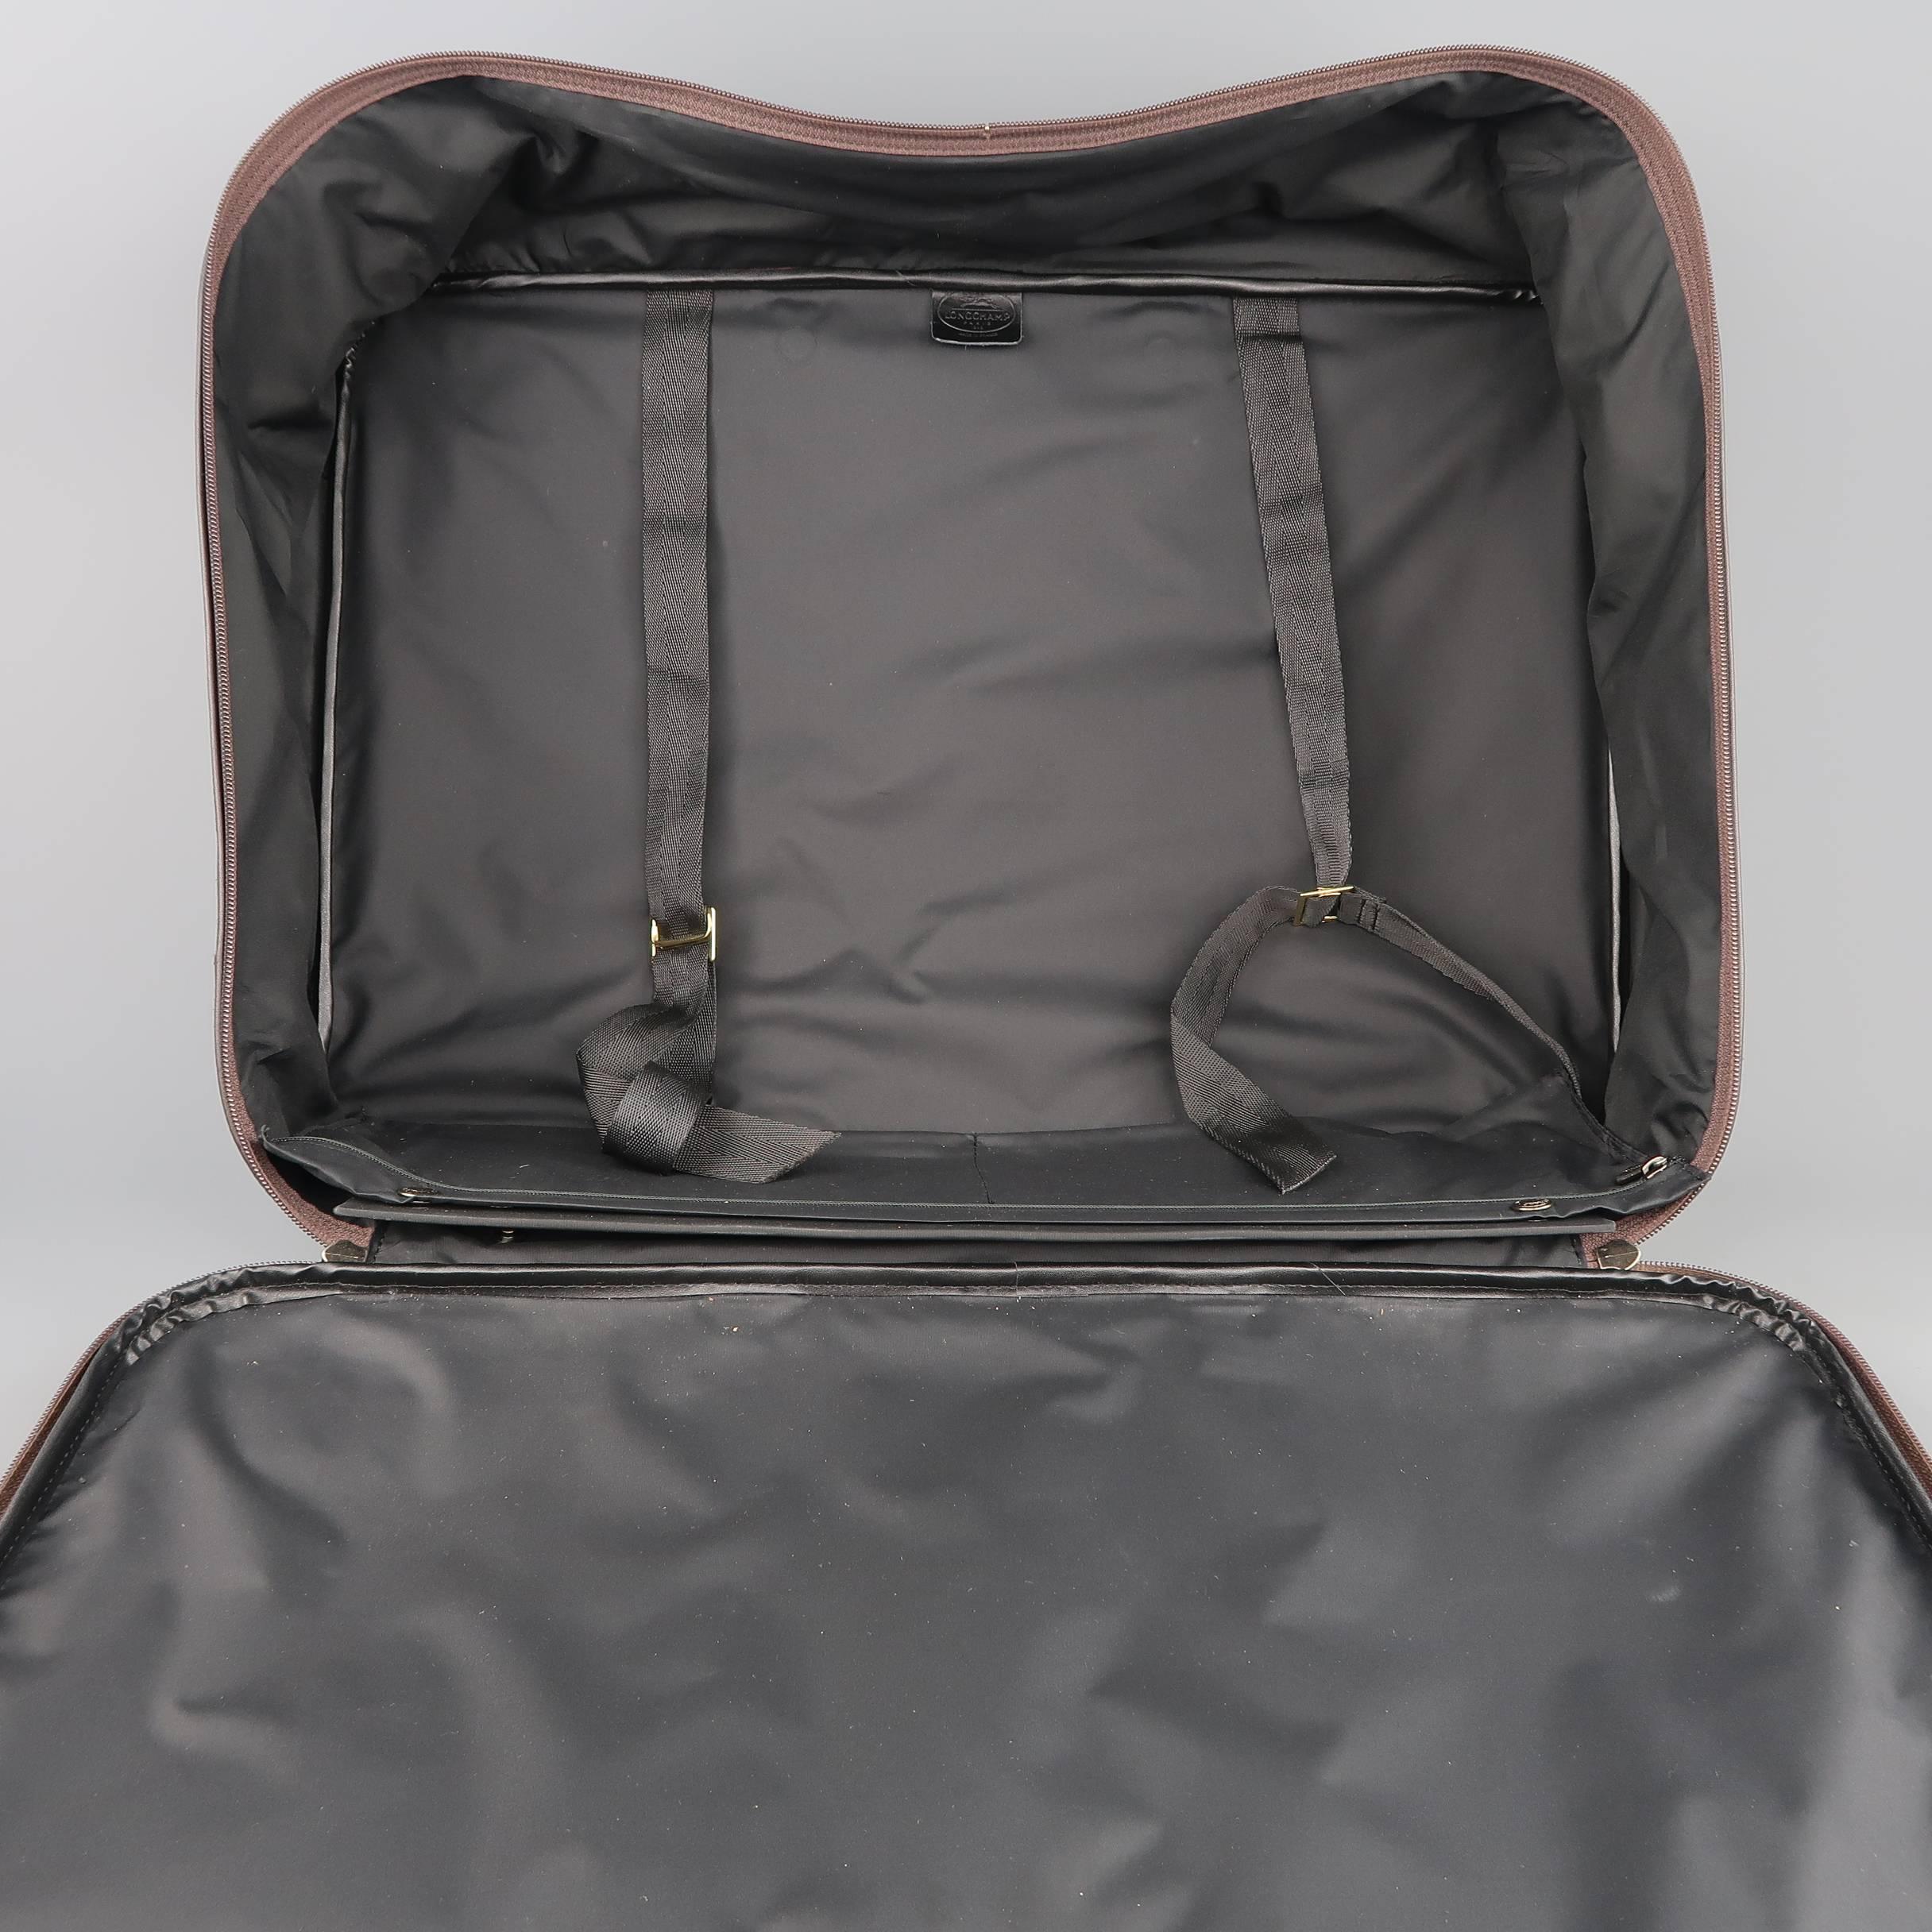 LONGCHAMP Dark Brown Leather Carry On Suitcase Travel Bag 2